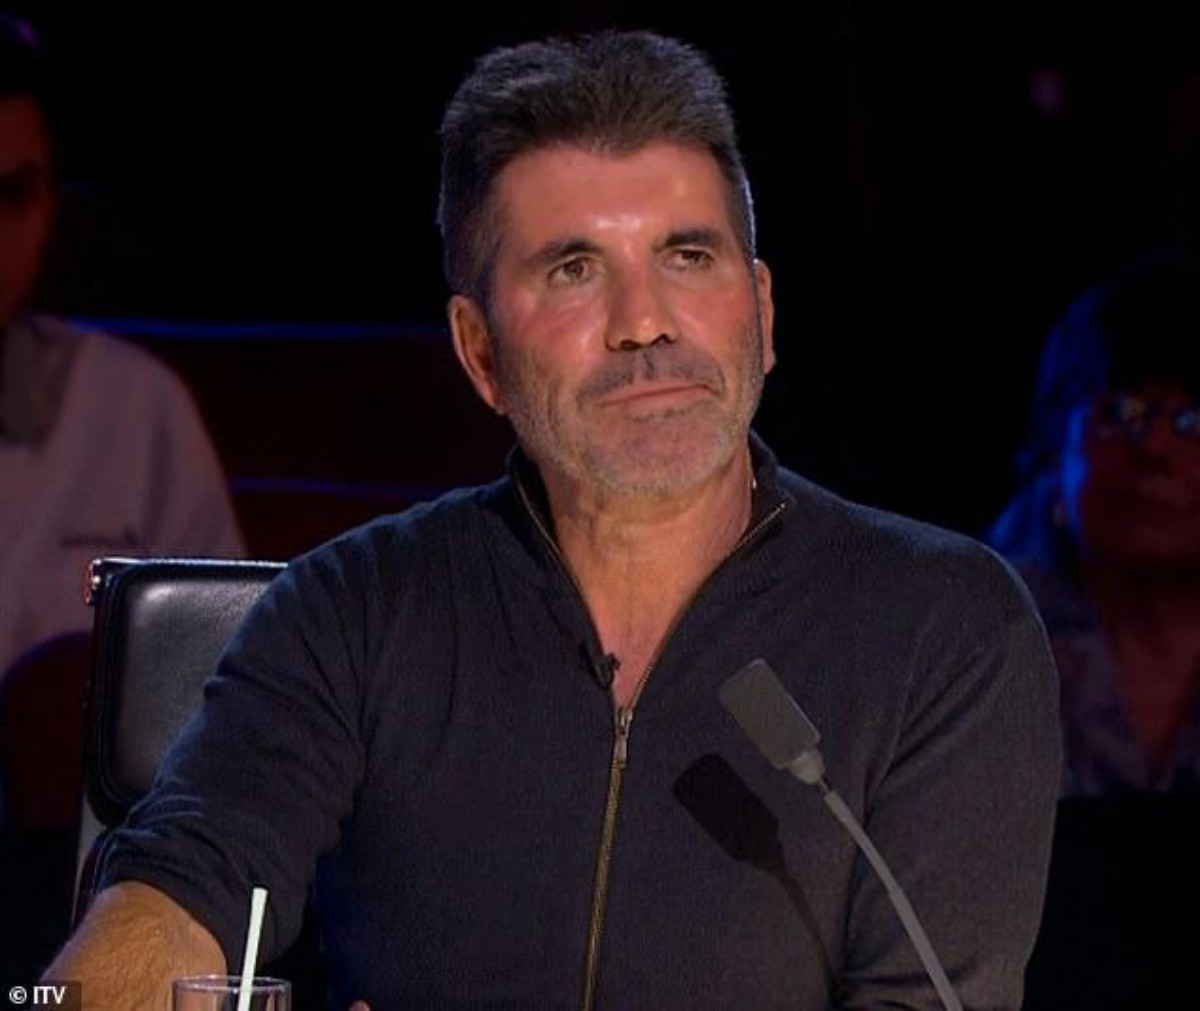 OMG! Simon Cowell’s New Appearance Leaves Mouths Open & BGT Viewers In Shock